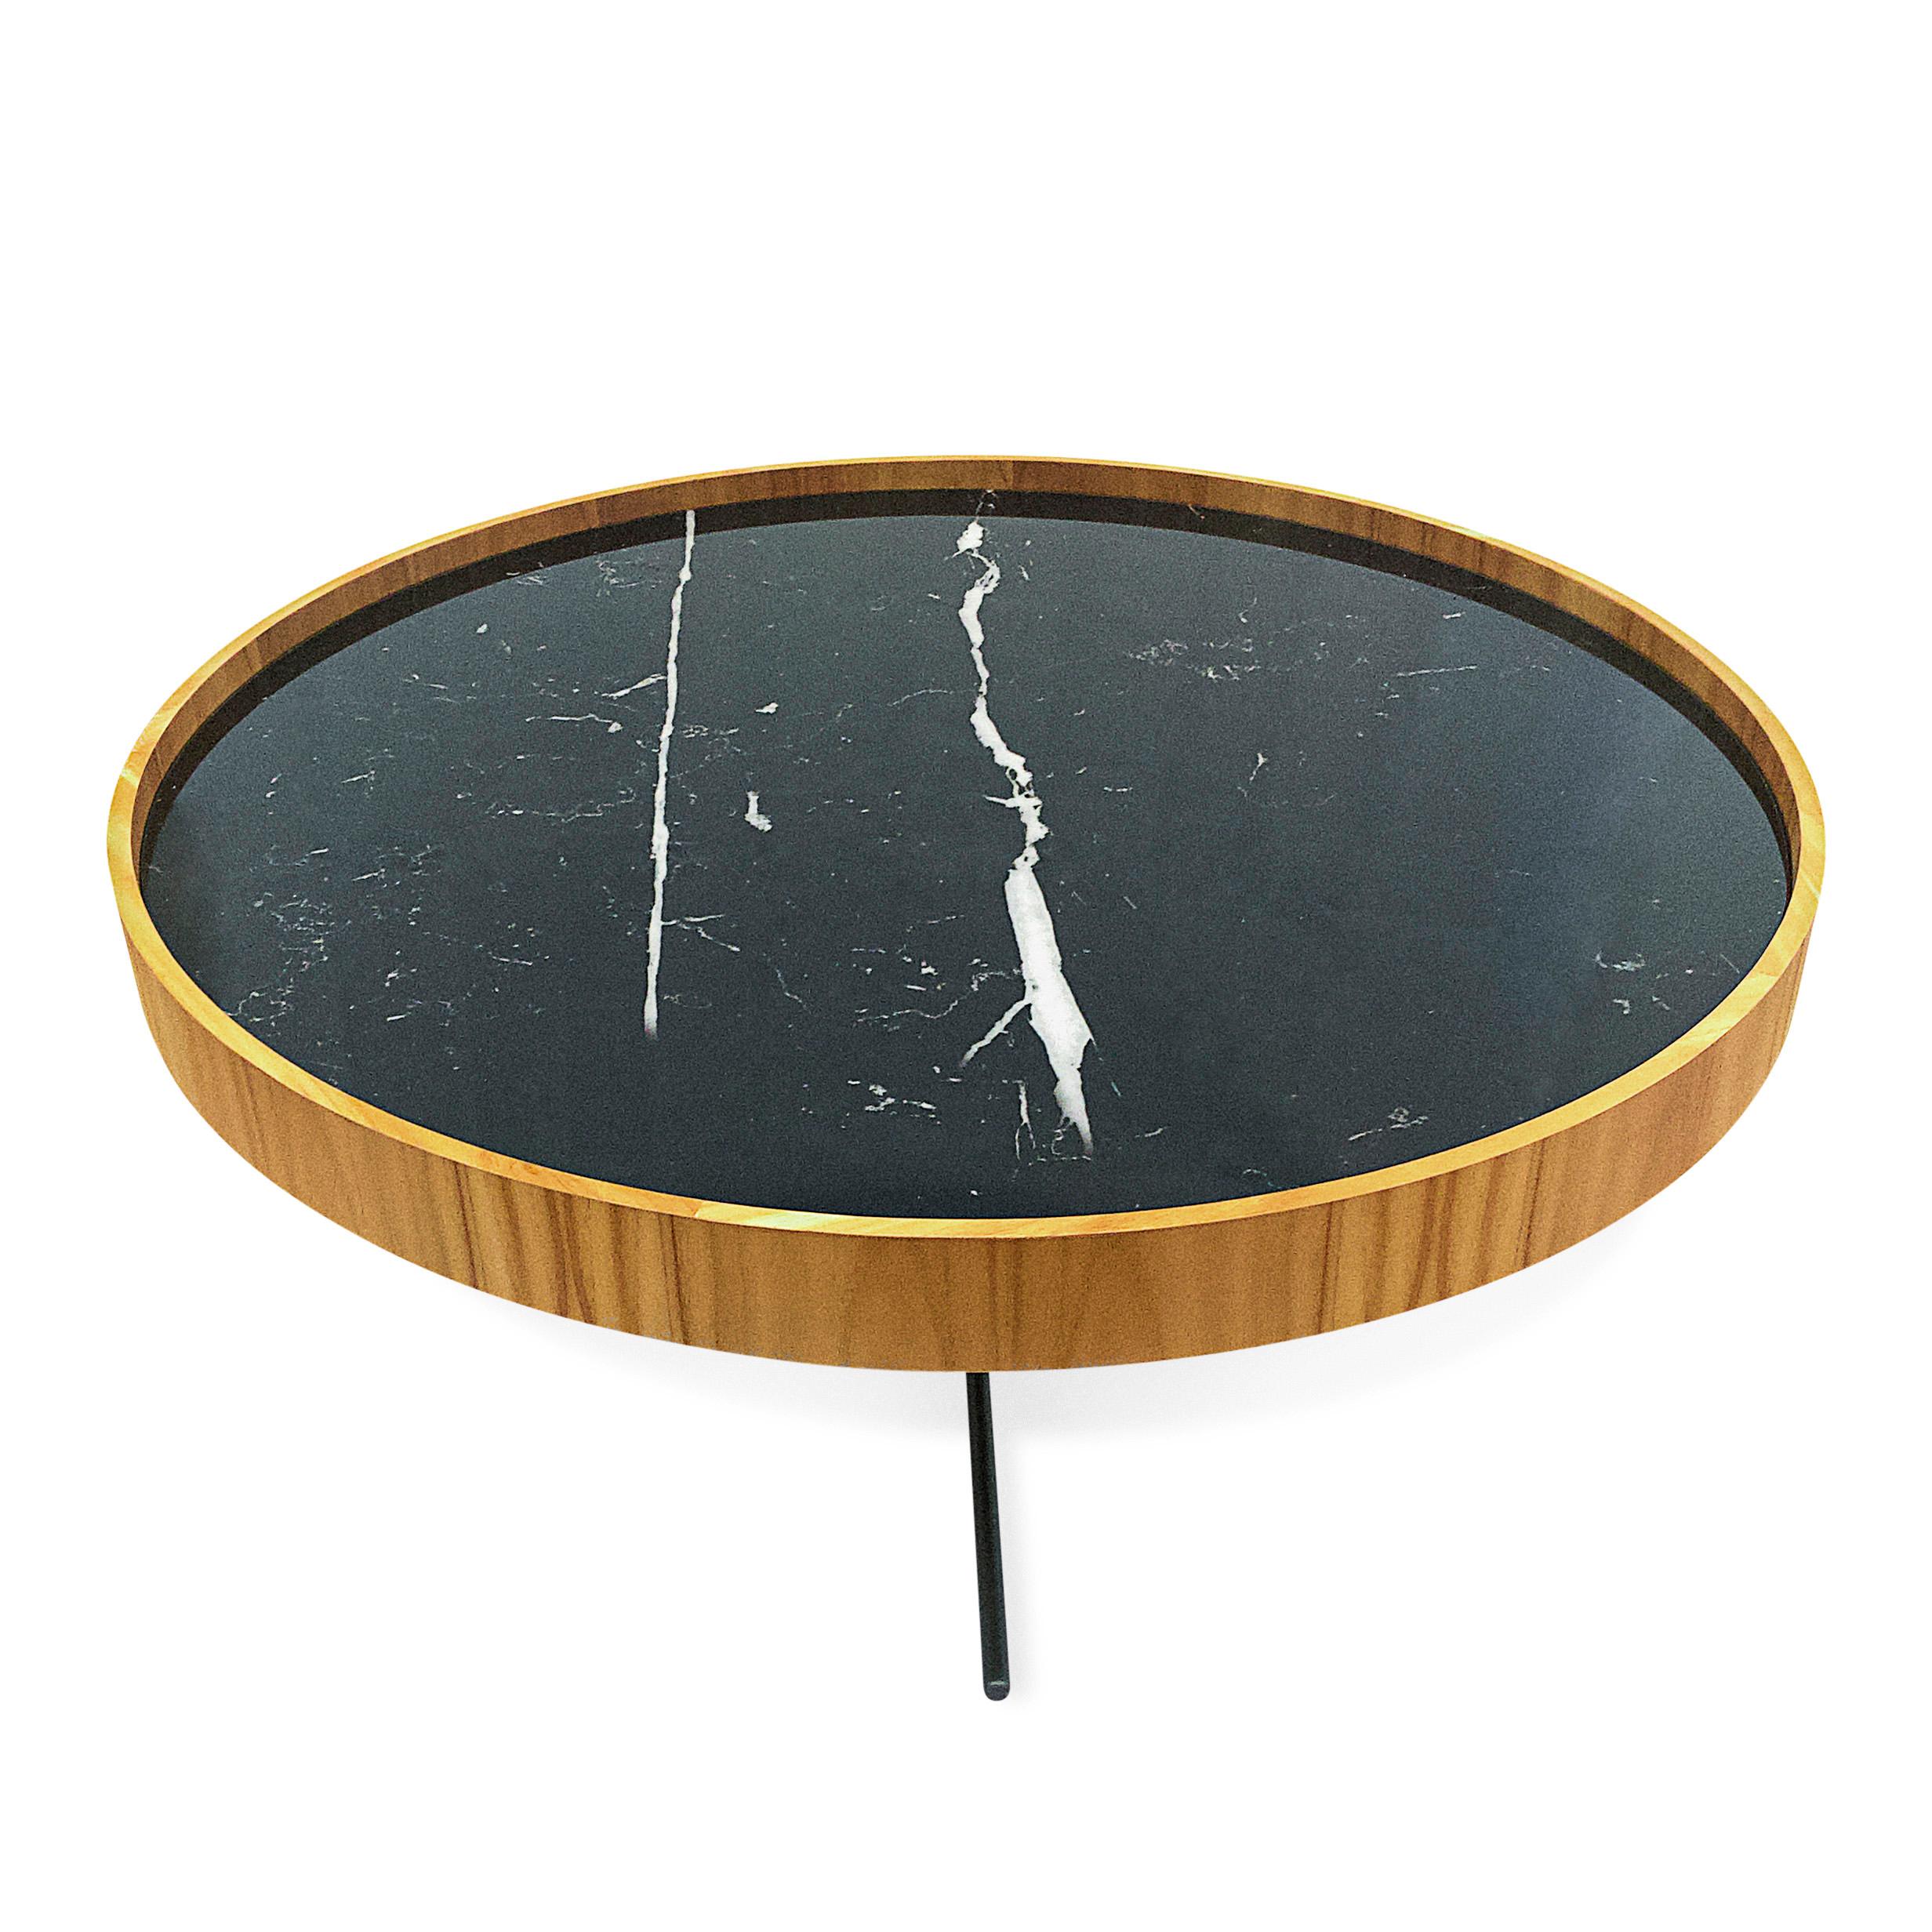 Polished Regia Occasional Table in Teak Wood Finish Featuring Black Nero Glass, Set of 2 For Sale